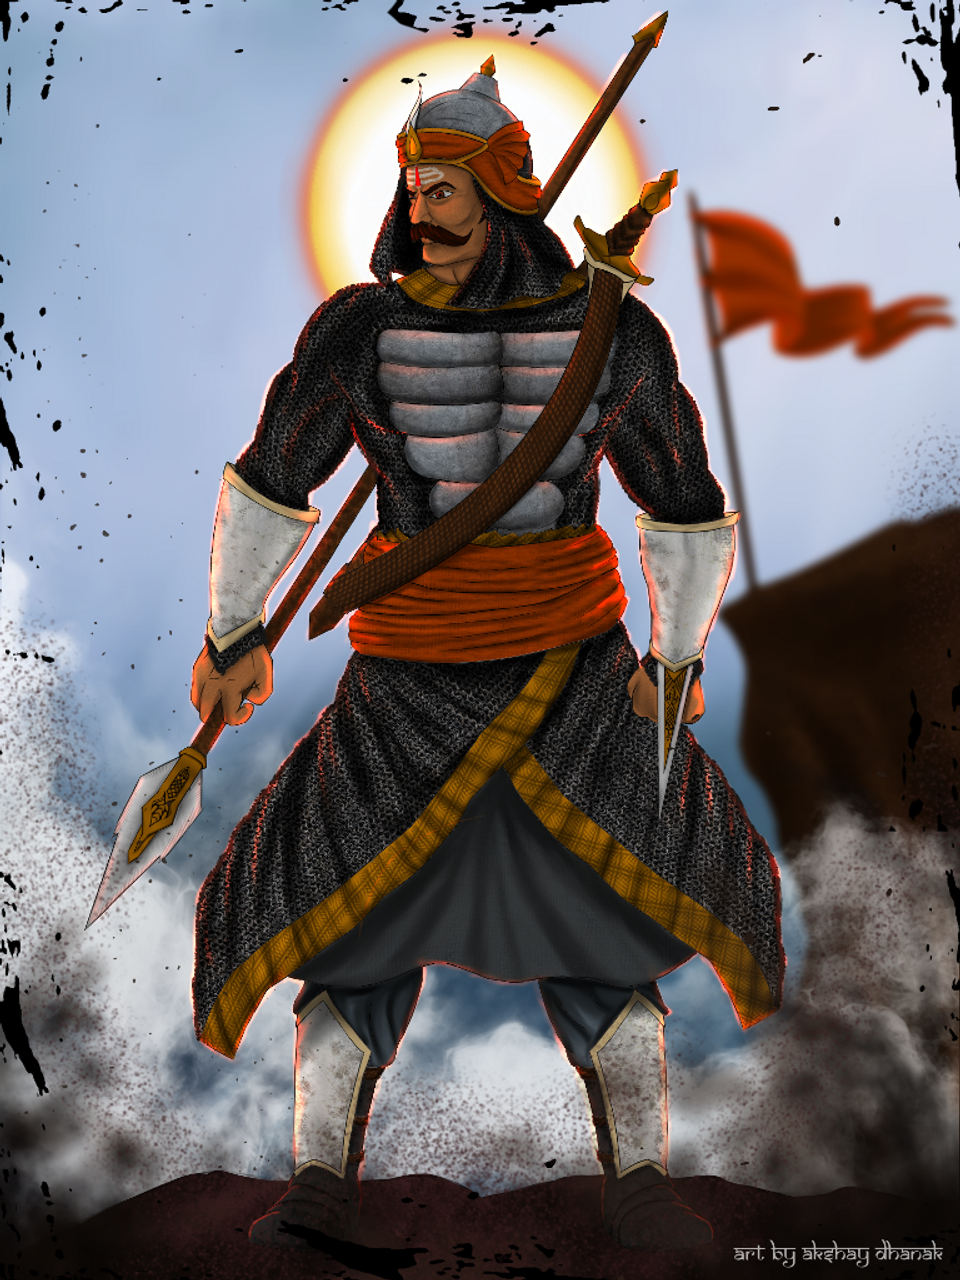 Maharana Pratap death anniversary how he protected Mewar from Mughal attack